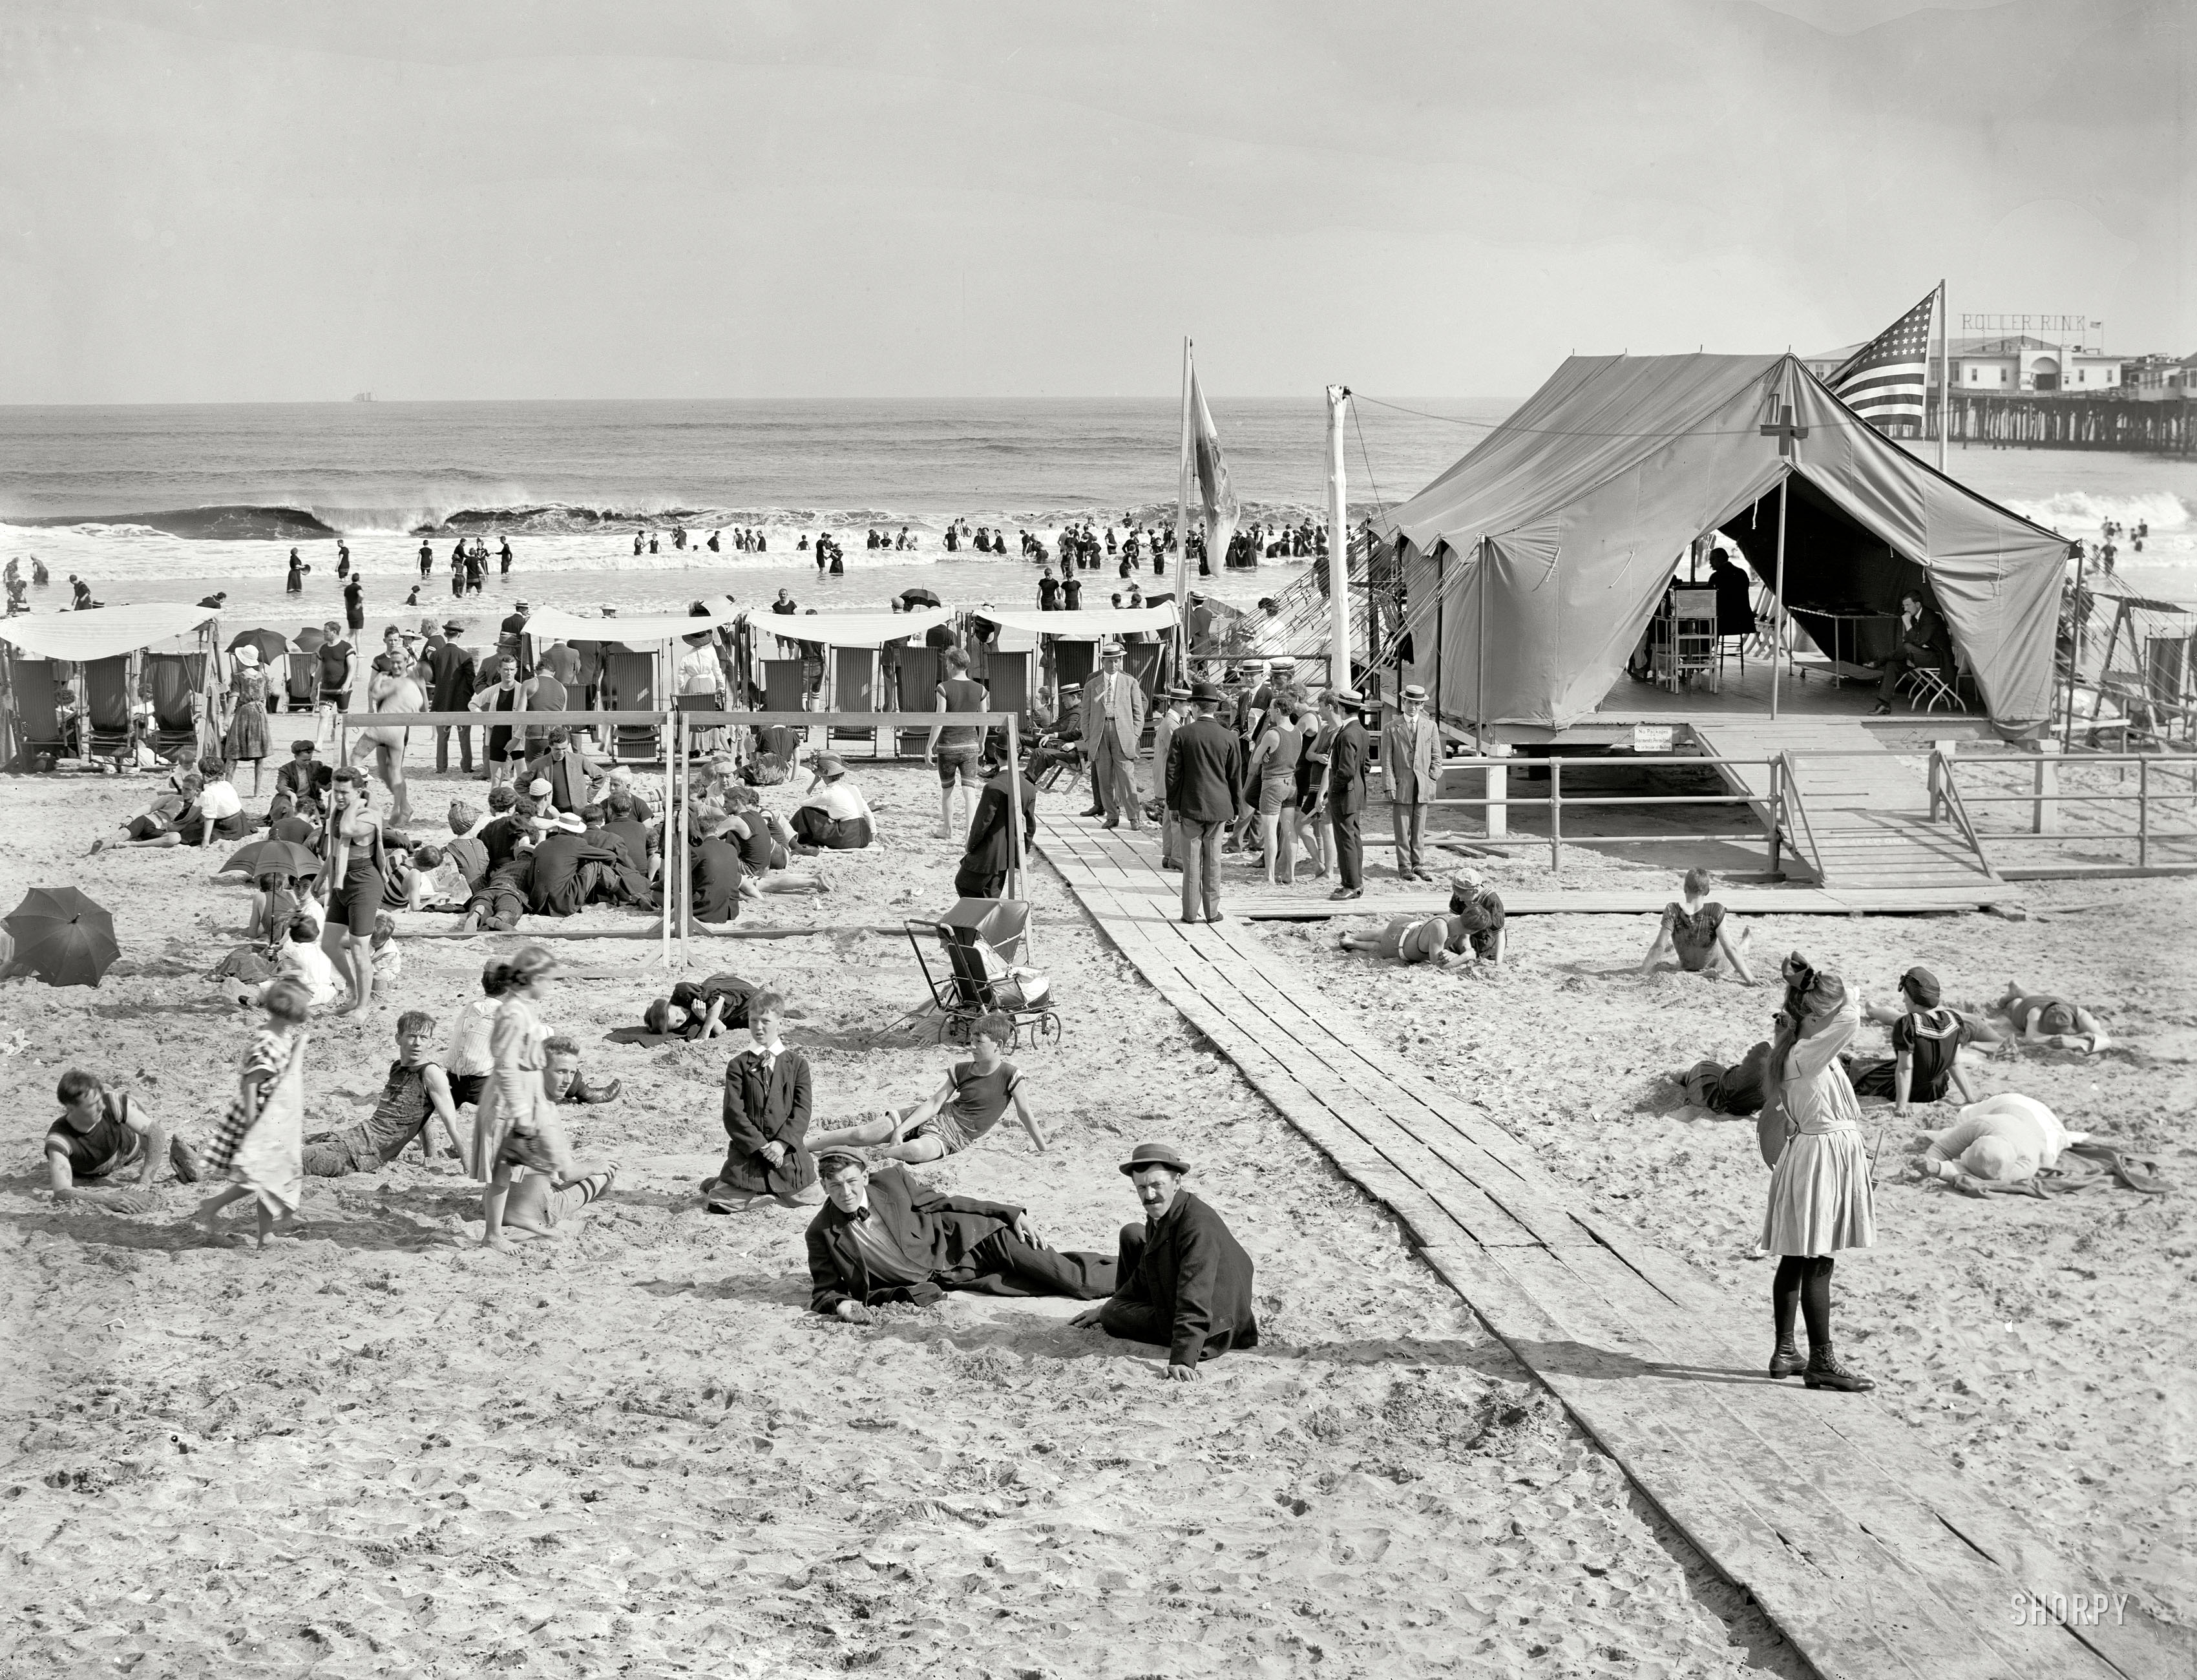 Circa 1915. "Surf bathing at Atlantic City." Where not all the suits are for swimming. 8x10 inch glass negative, Detroit Publishing Co. View full size.